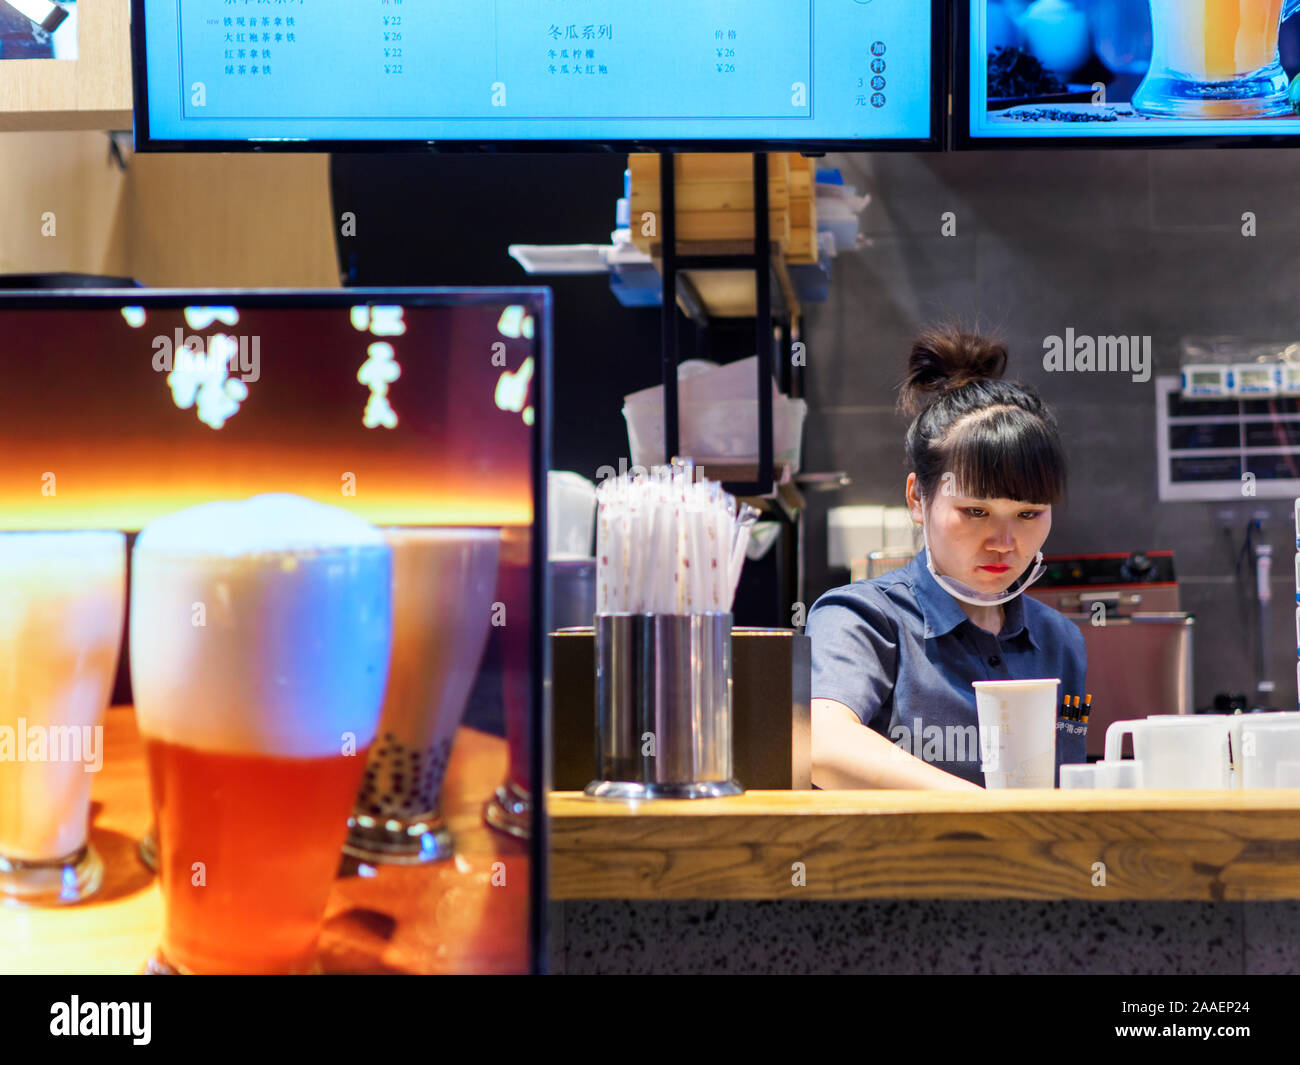 TIANJIN, CHINA - 7 OCT 2019 - A bubble tea stall employee within a shopping mall preparing a drink for customers. Food & beverage / consumer culture t Stock Photo